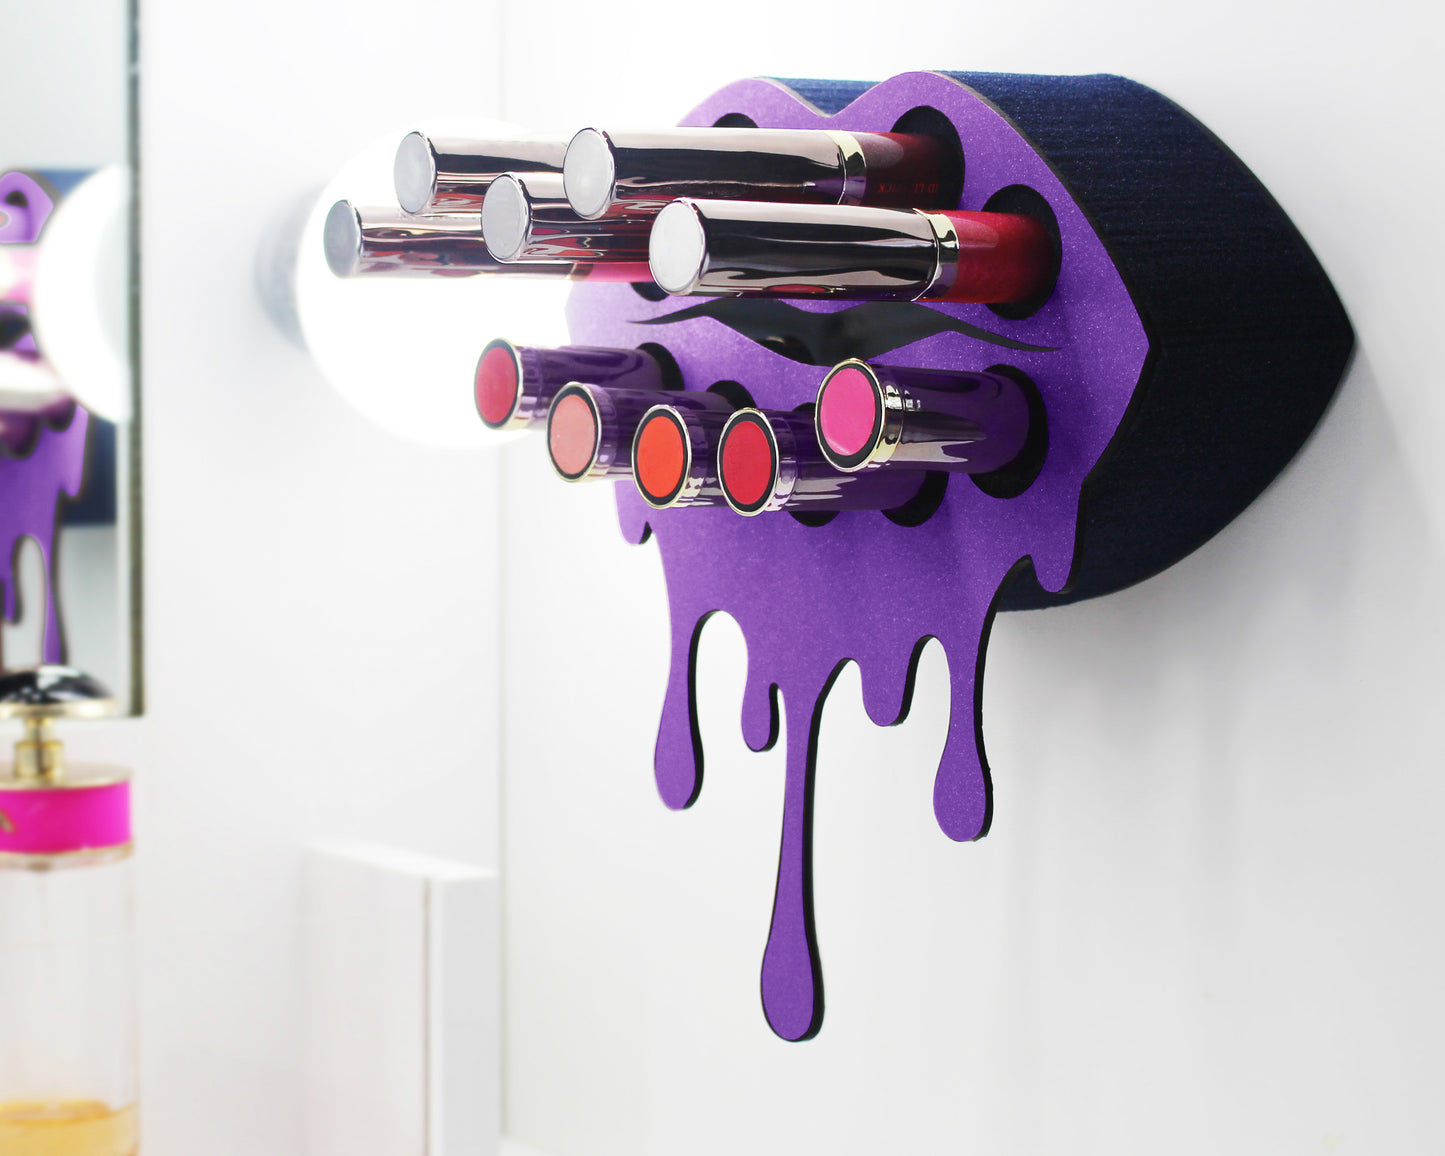 Black Small Lip Design Lipstick Organizer holding 10 lipsticks mounted on the wall with lipstick easily accessible and organized. Hanging Lipstick Holder that looks like wall art.